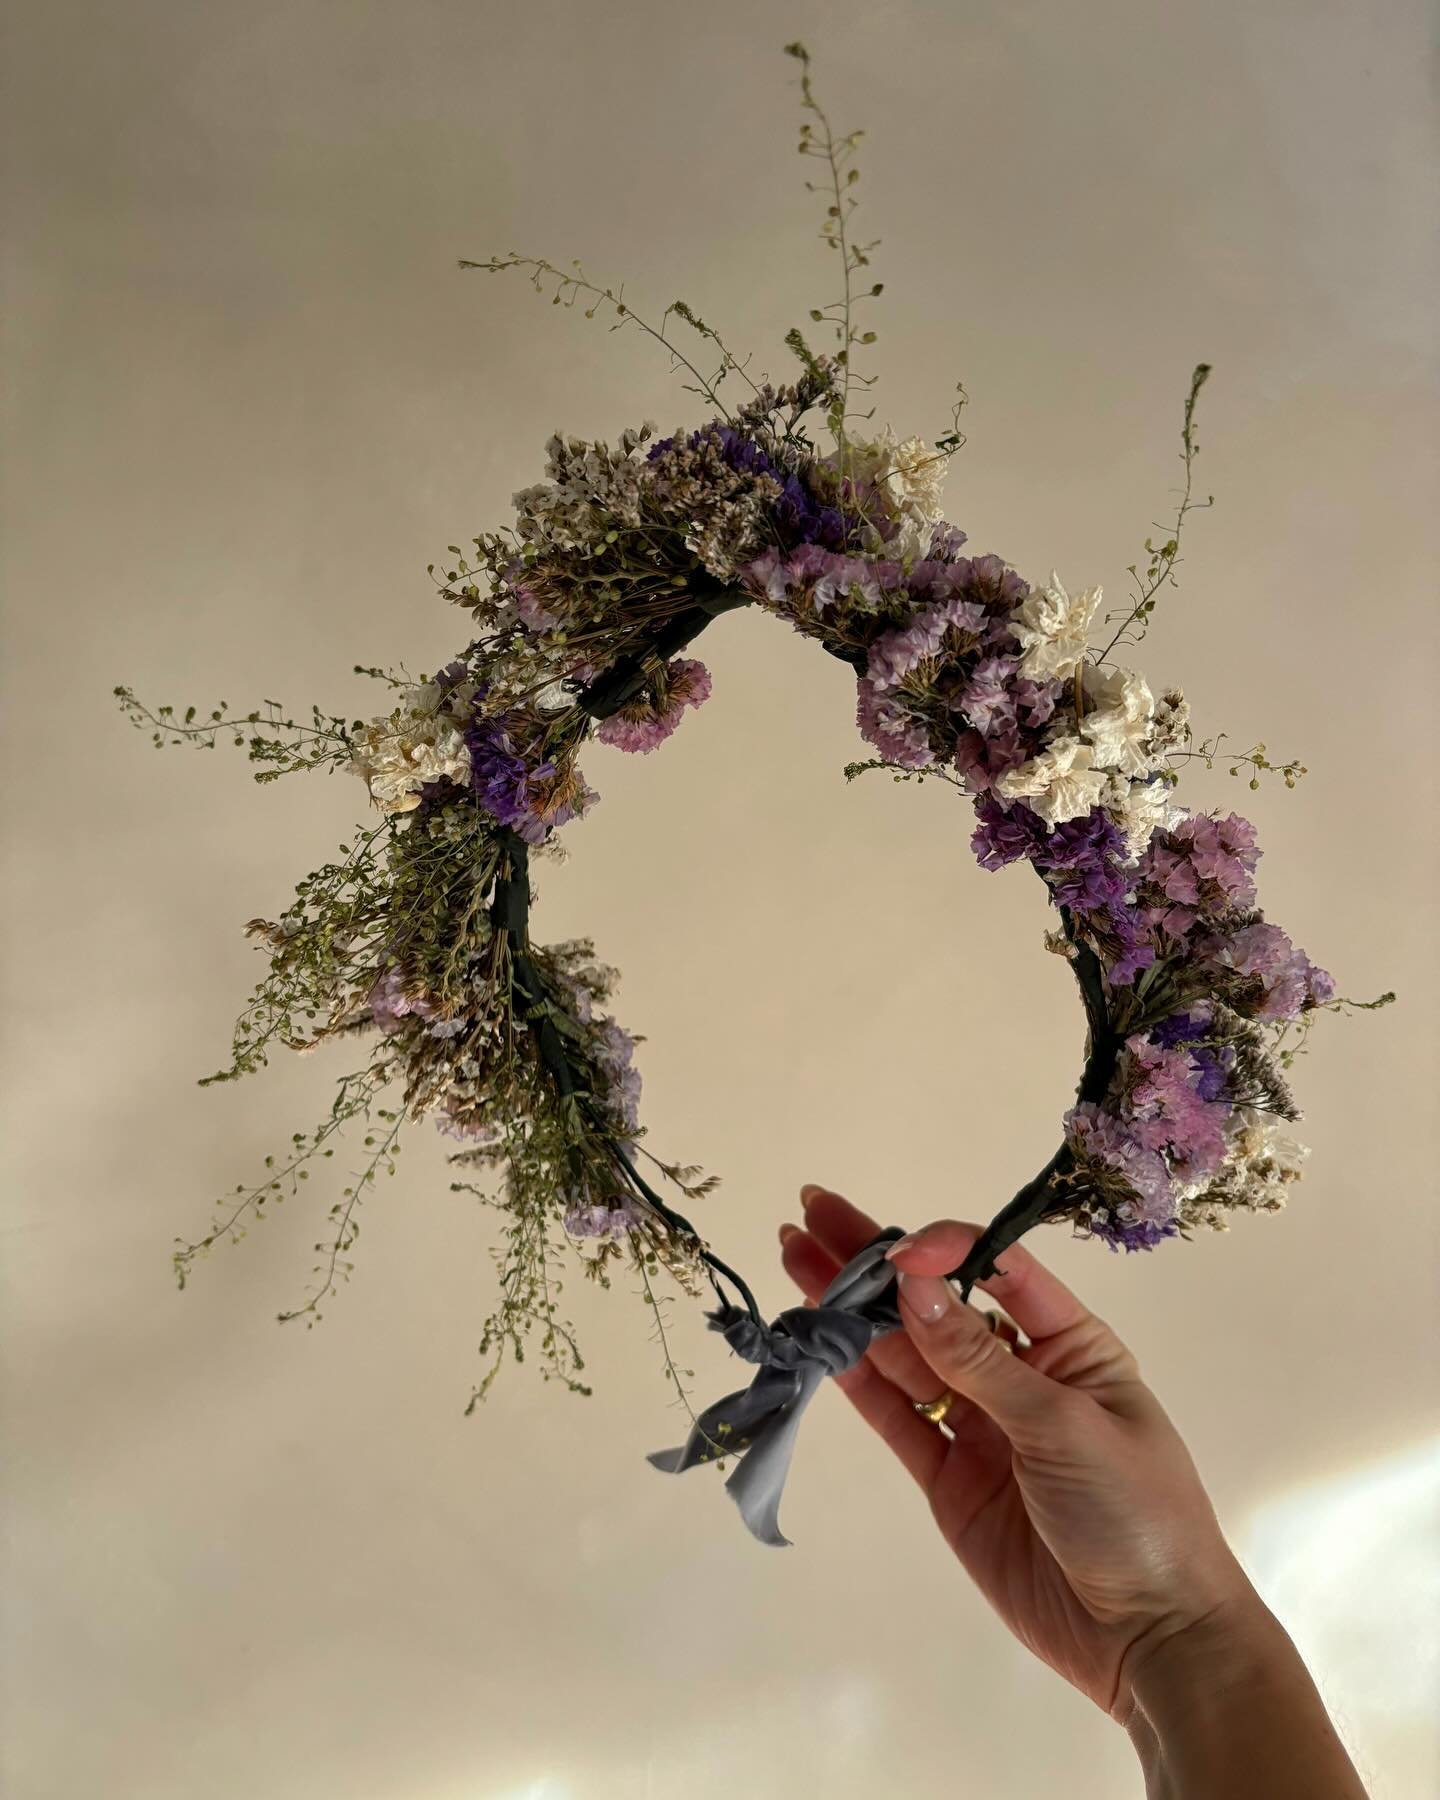 It&rsquo;s a week of event releases for Kinsbrook this week - and tonight, we&rsquo;re releasing tickets for a May Flower Crown Workshop on Saturday 4th May, with incredible local flower farmer and florist Victoria from @sussexfarmhouseflowers 

Set 